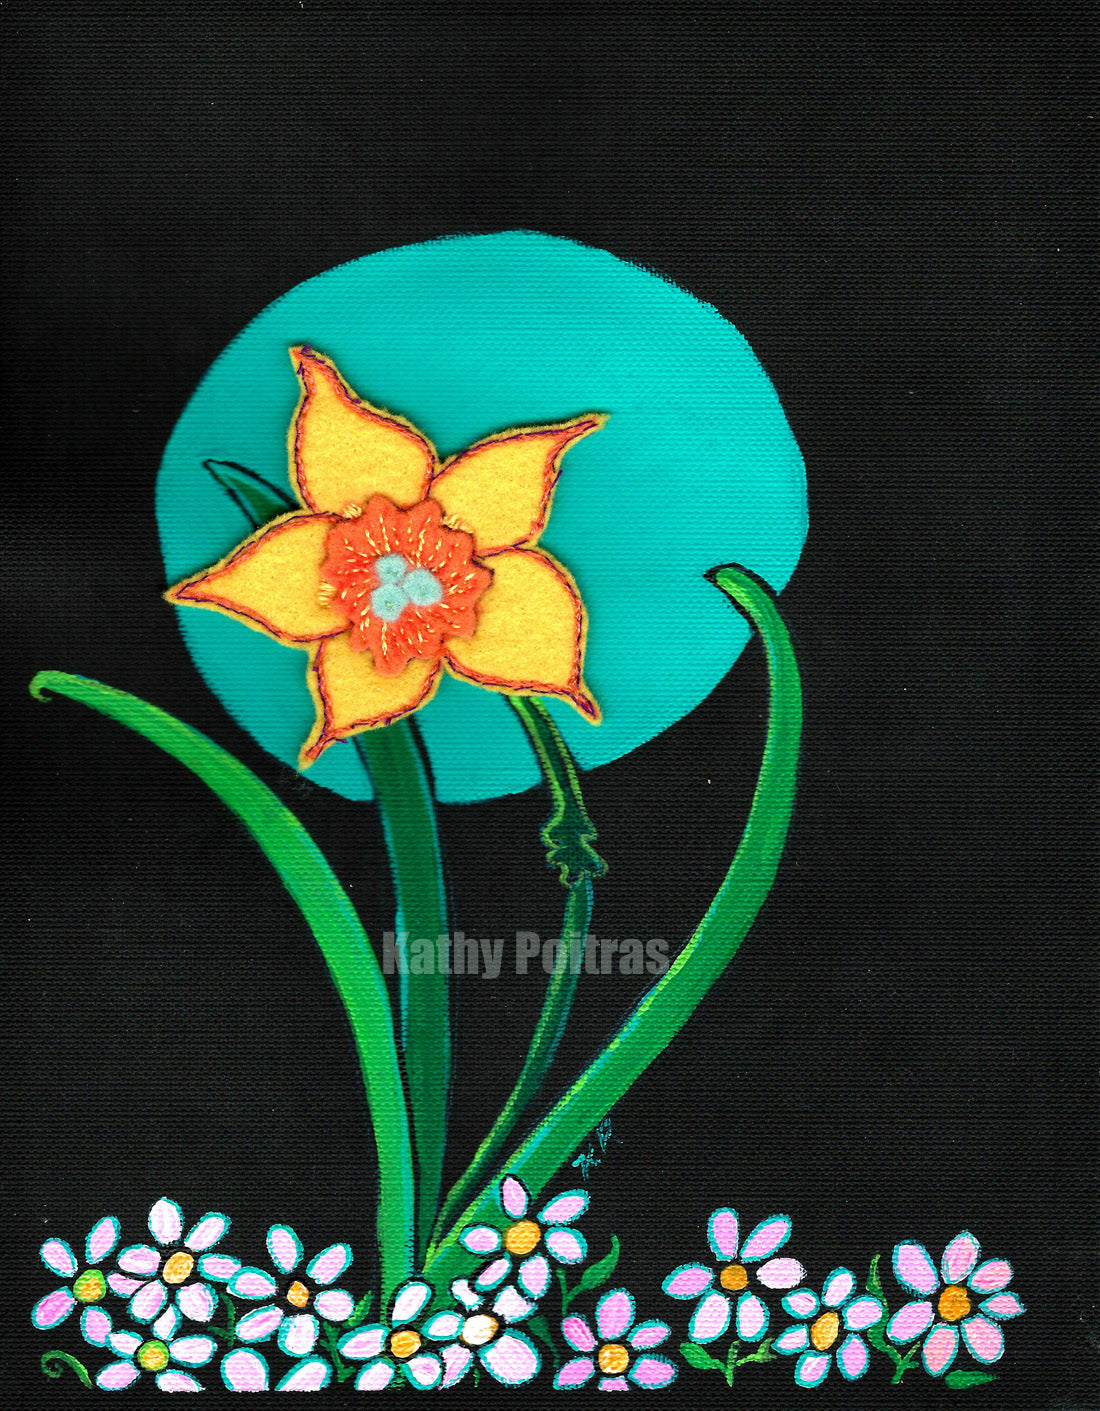 felt daffodil blossom with hand embroidery. mounted on acrylic painting  on black canvas paper with a turquoise moon and small pink flowers at the bottom